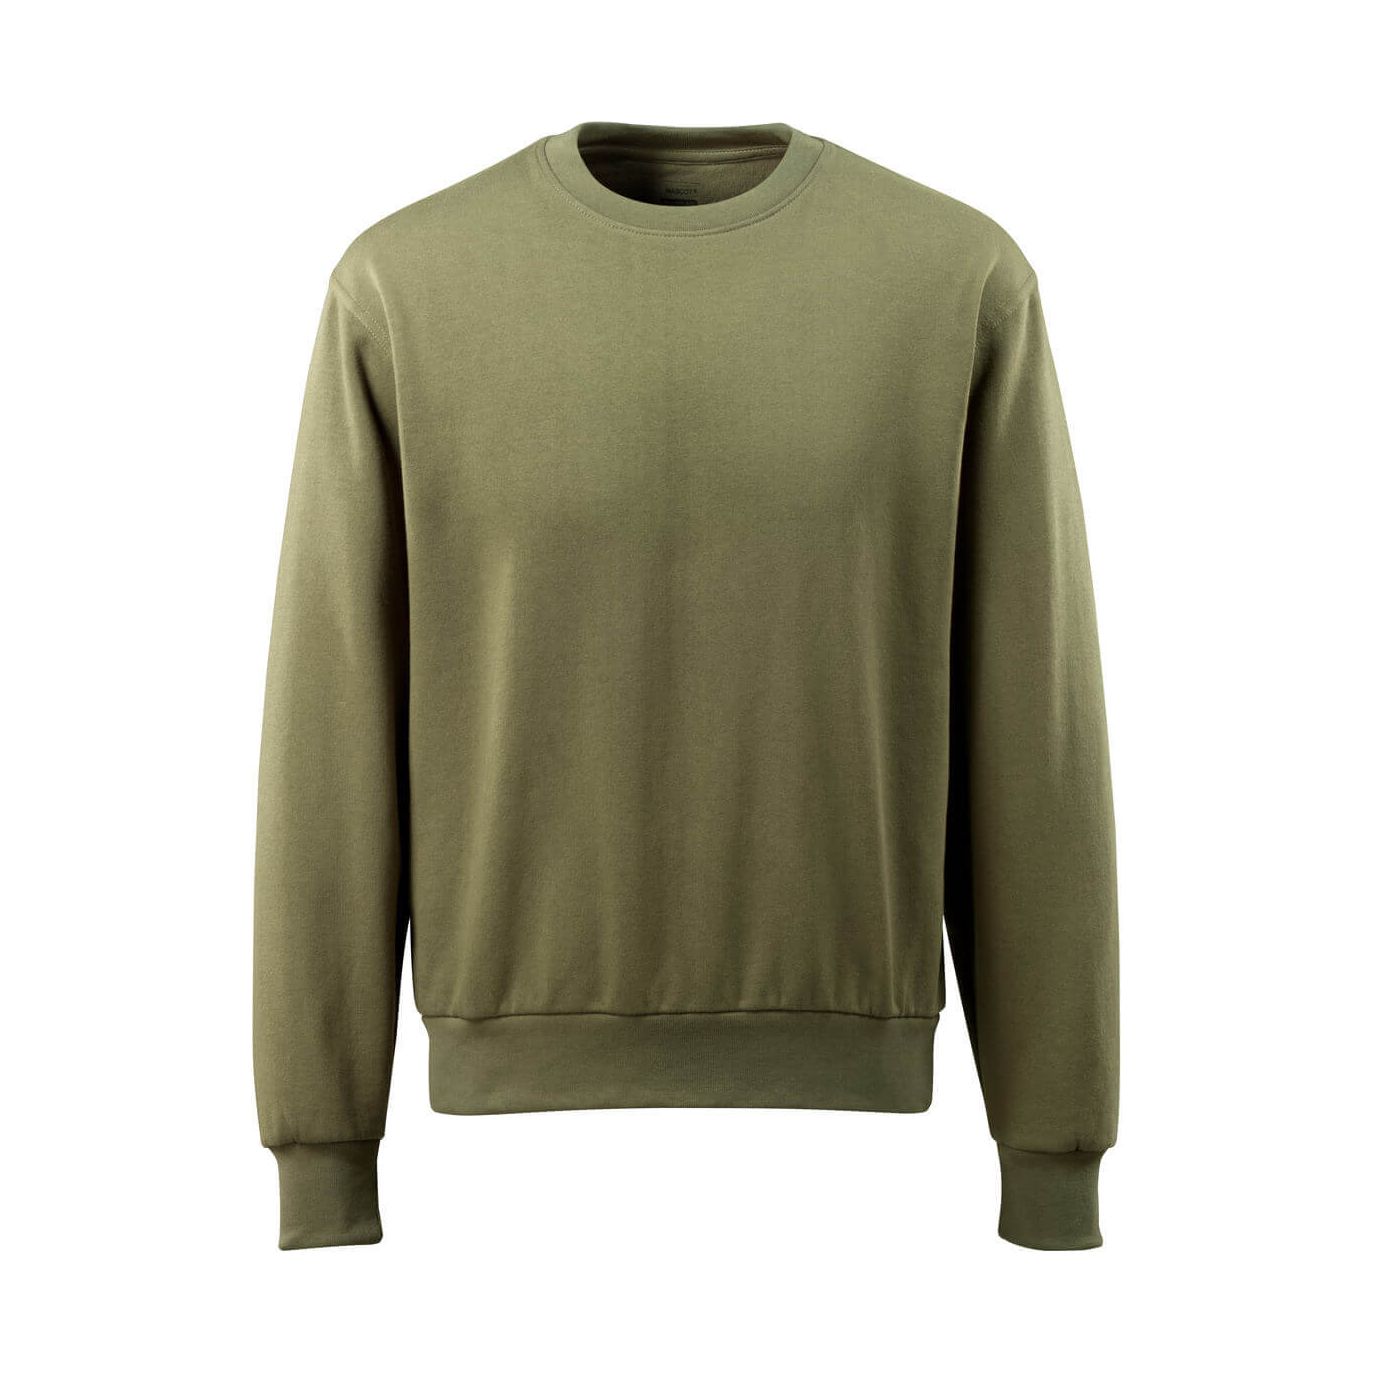 Mascot Carvin Sweatshirt Round-Neck 51580-966 - Crossover, Mens - (Colours 2 of 2)